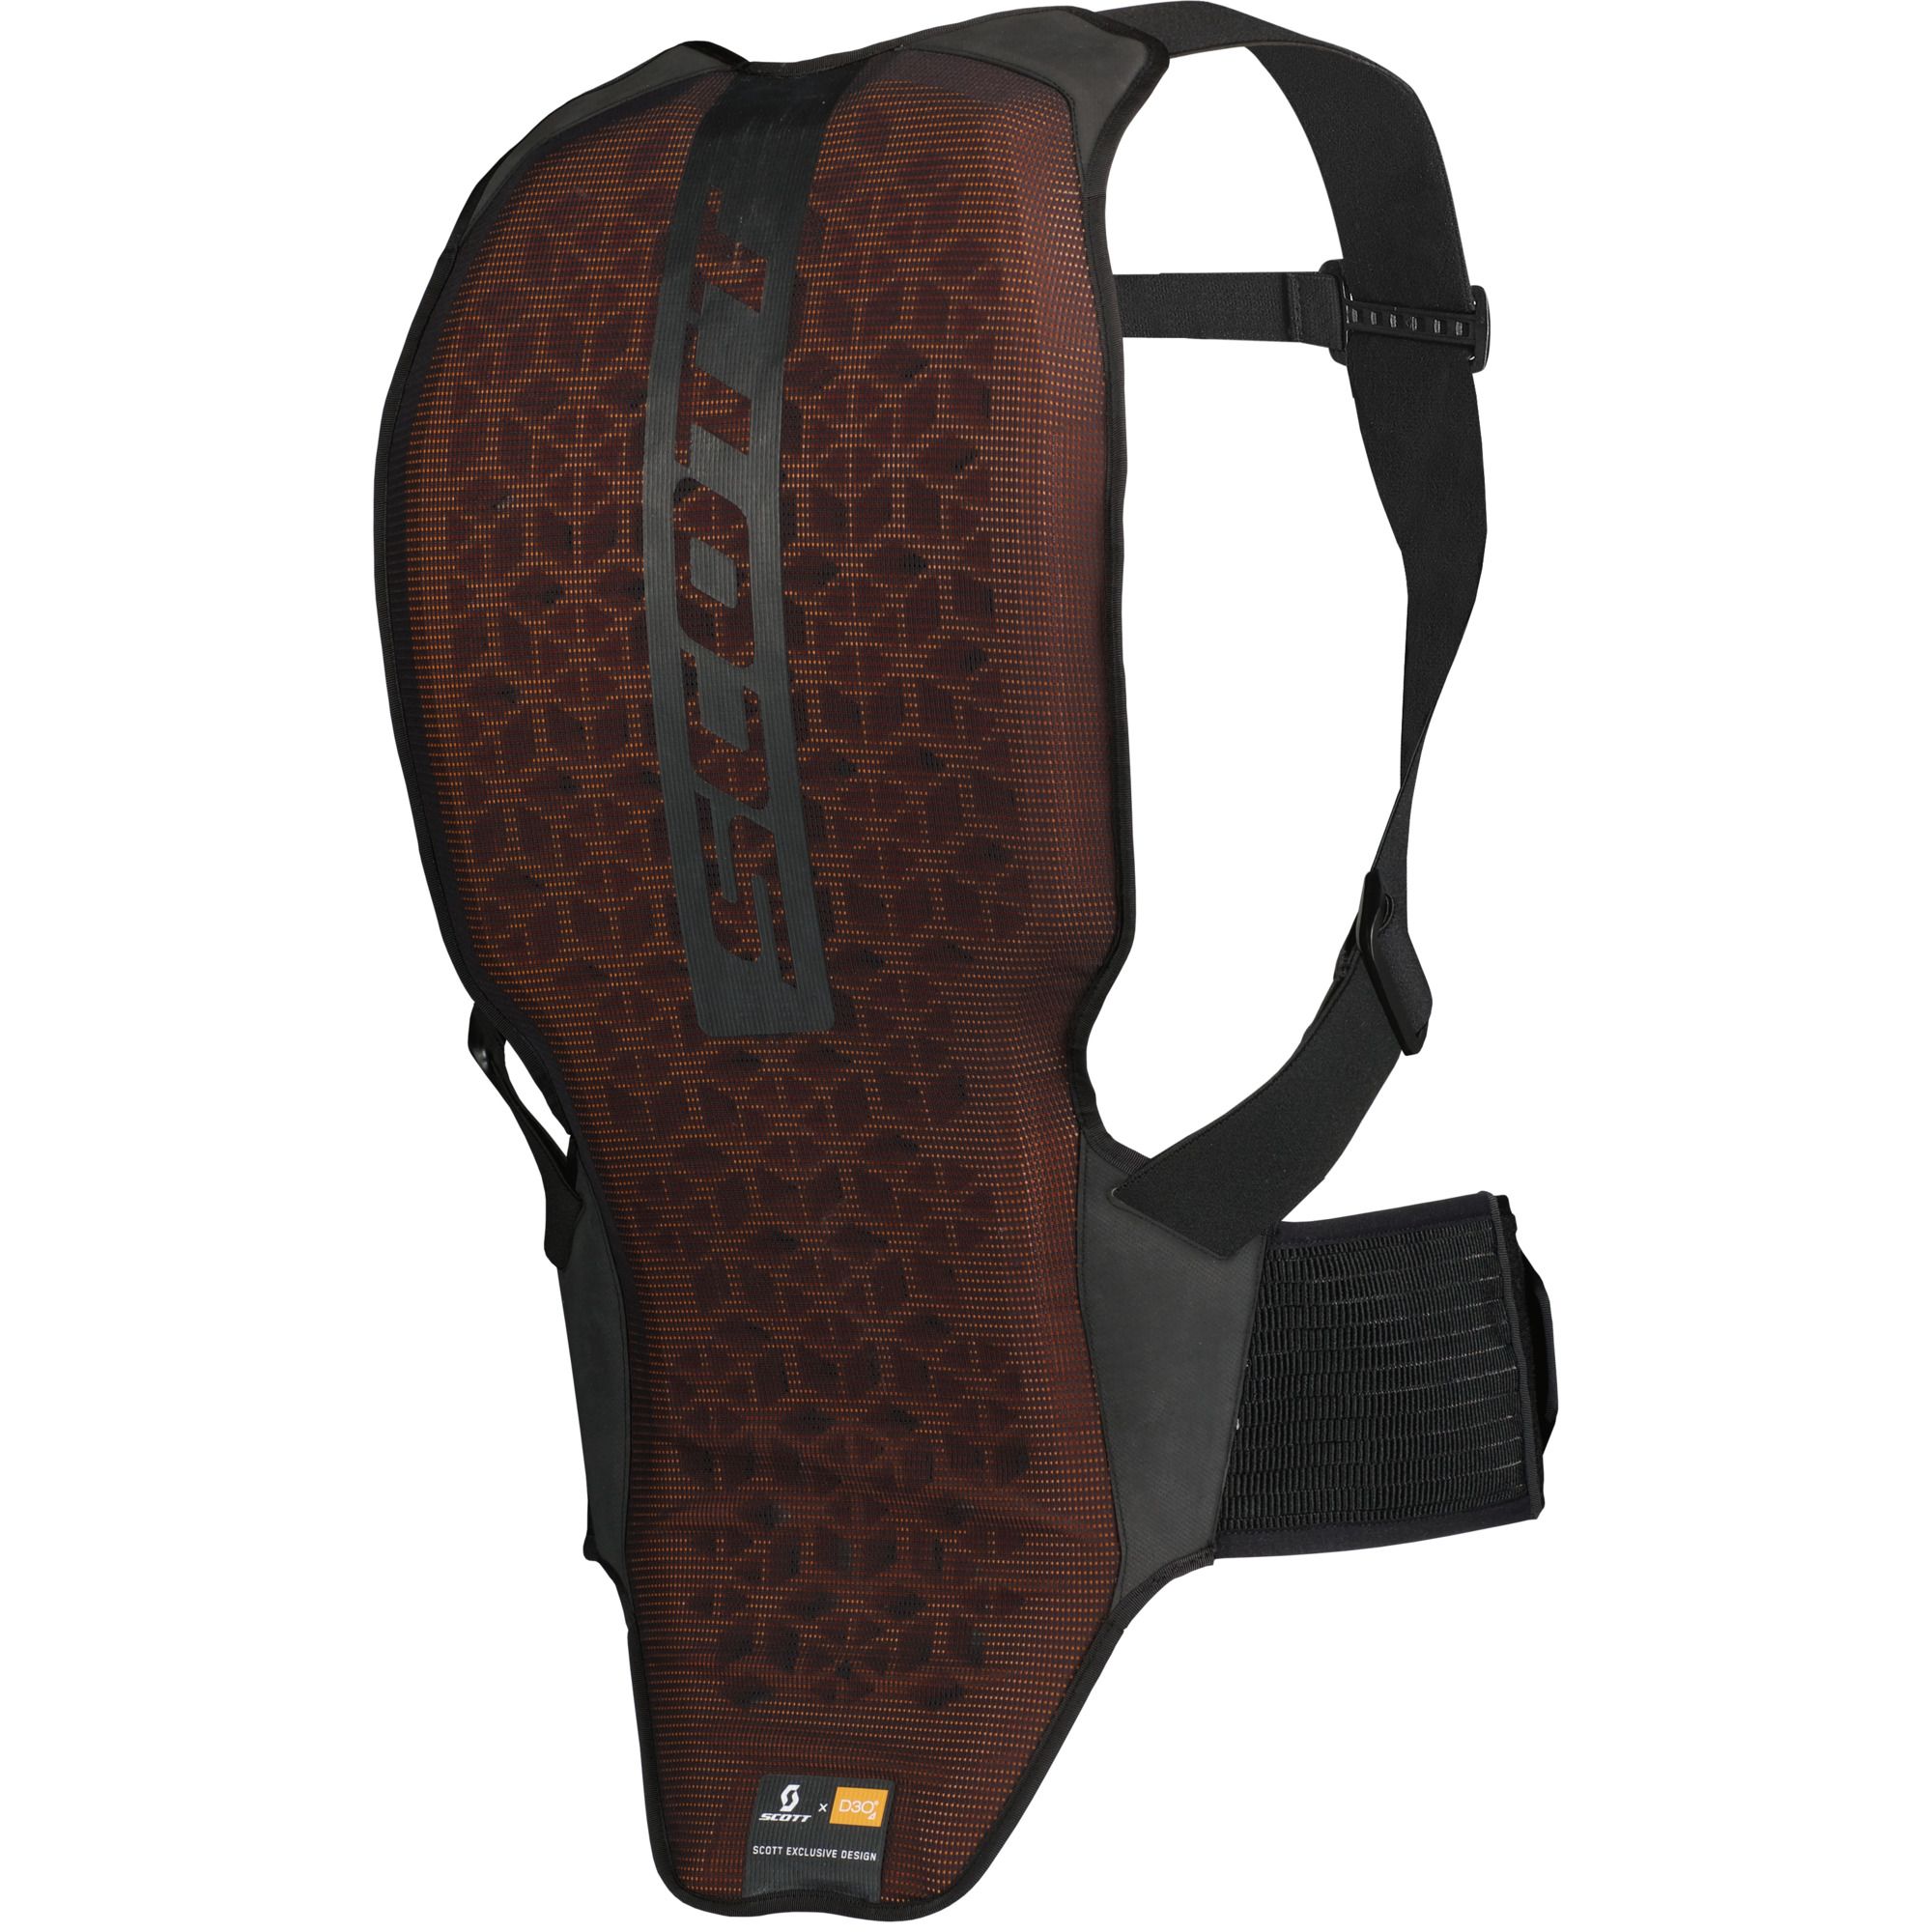 How to choose a back protector for skis racing